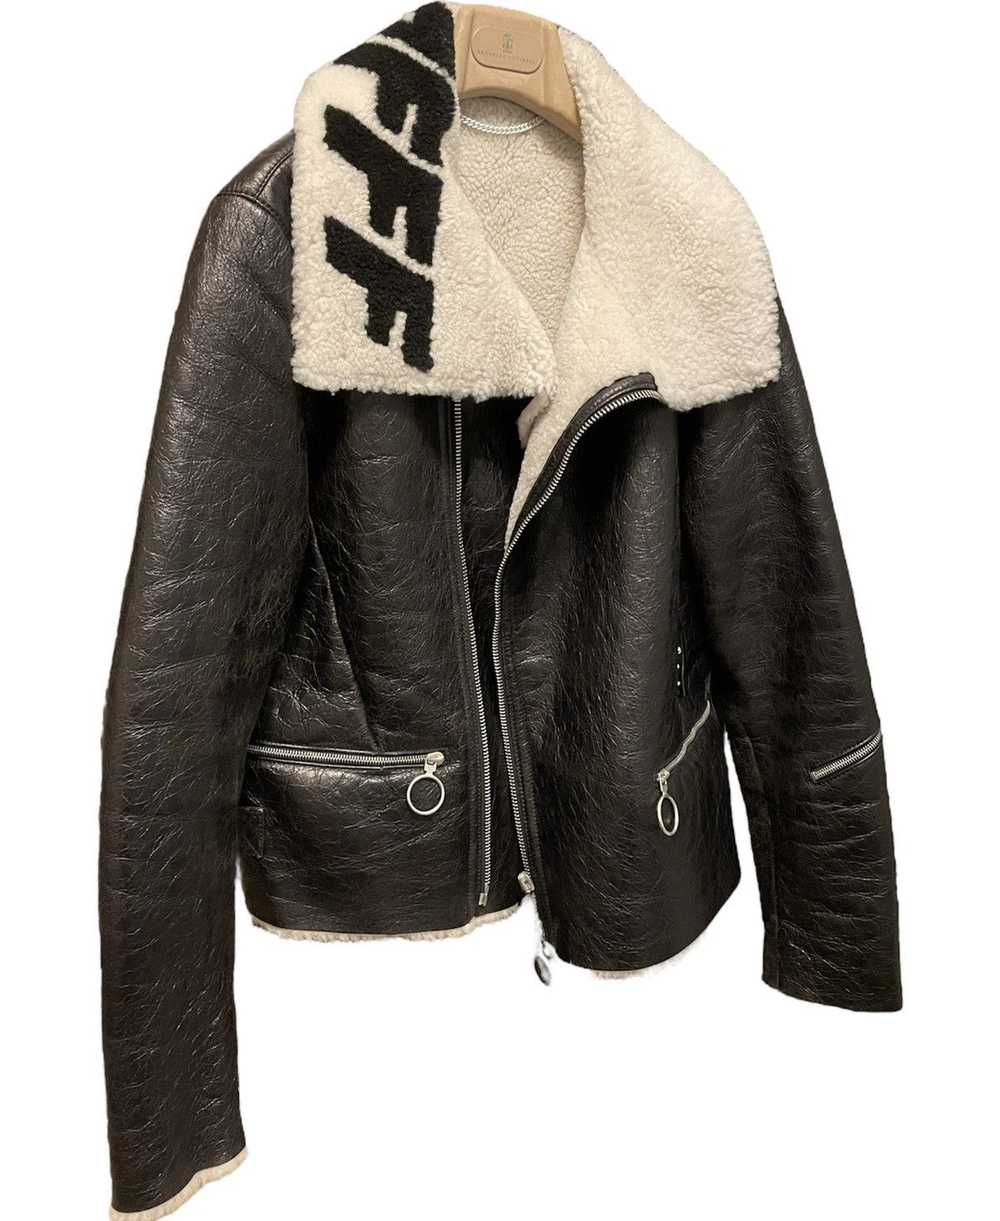 Off-White 🔥Off-White🔥Shearling Leather Jacket - image 7